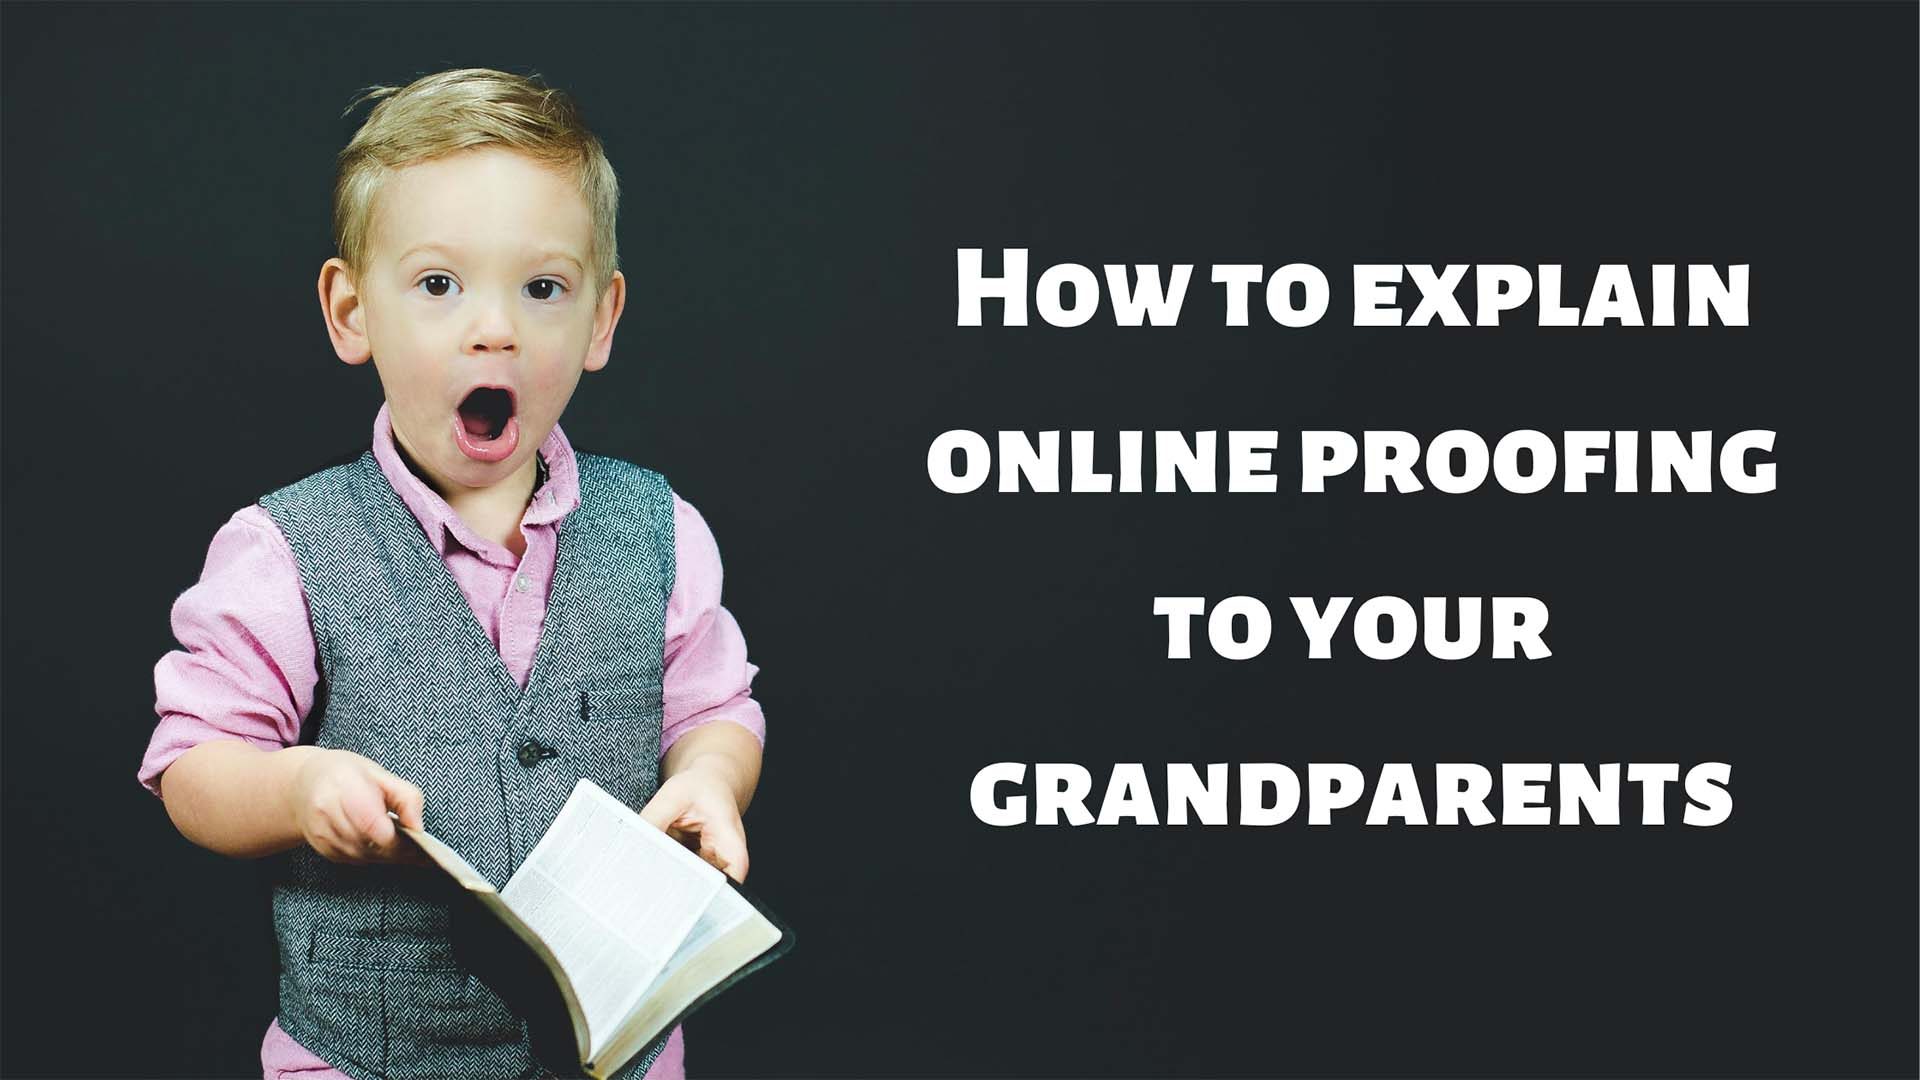 How-to-explain-online-proofing-to-your-grandparents-opt